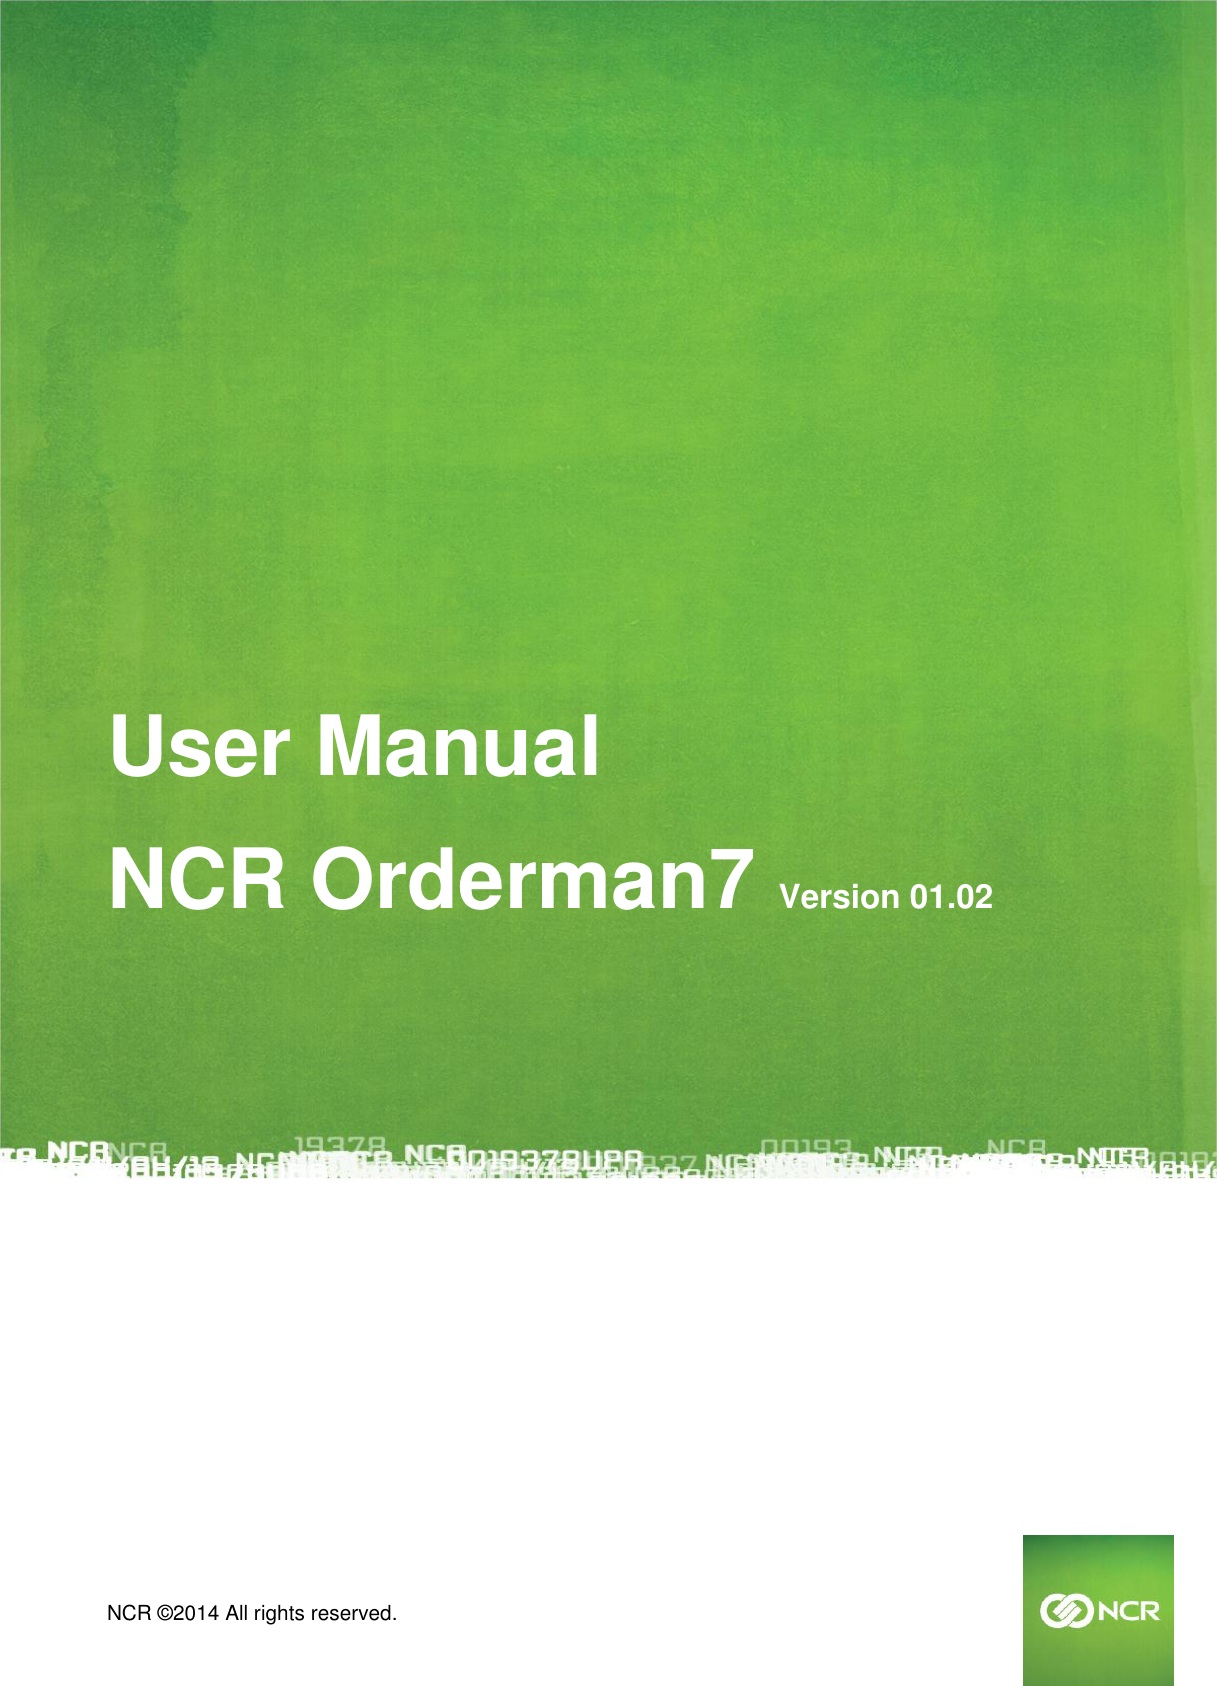  NCR ©2014 All rights reserved.        User Manual NCR Orderman7 Version 01.02     